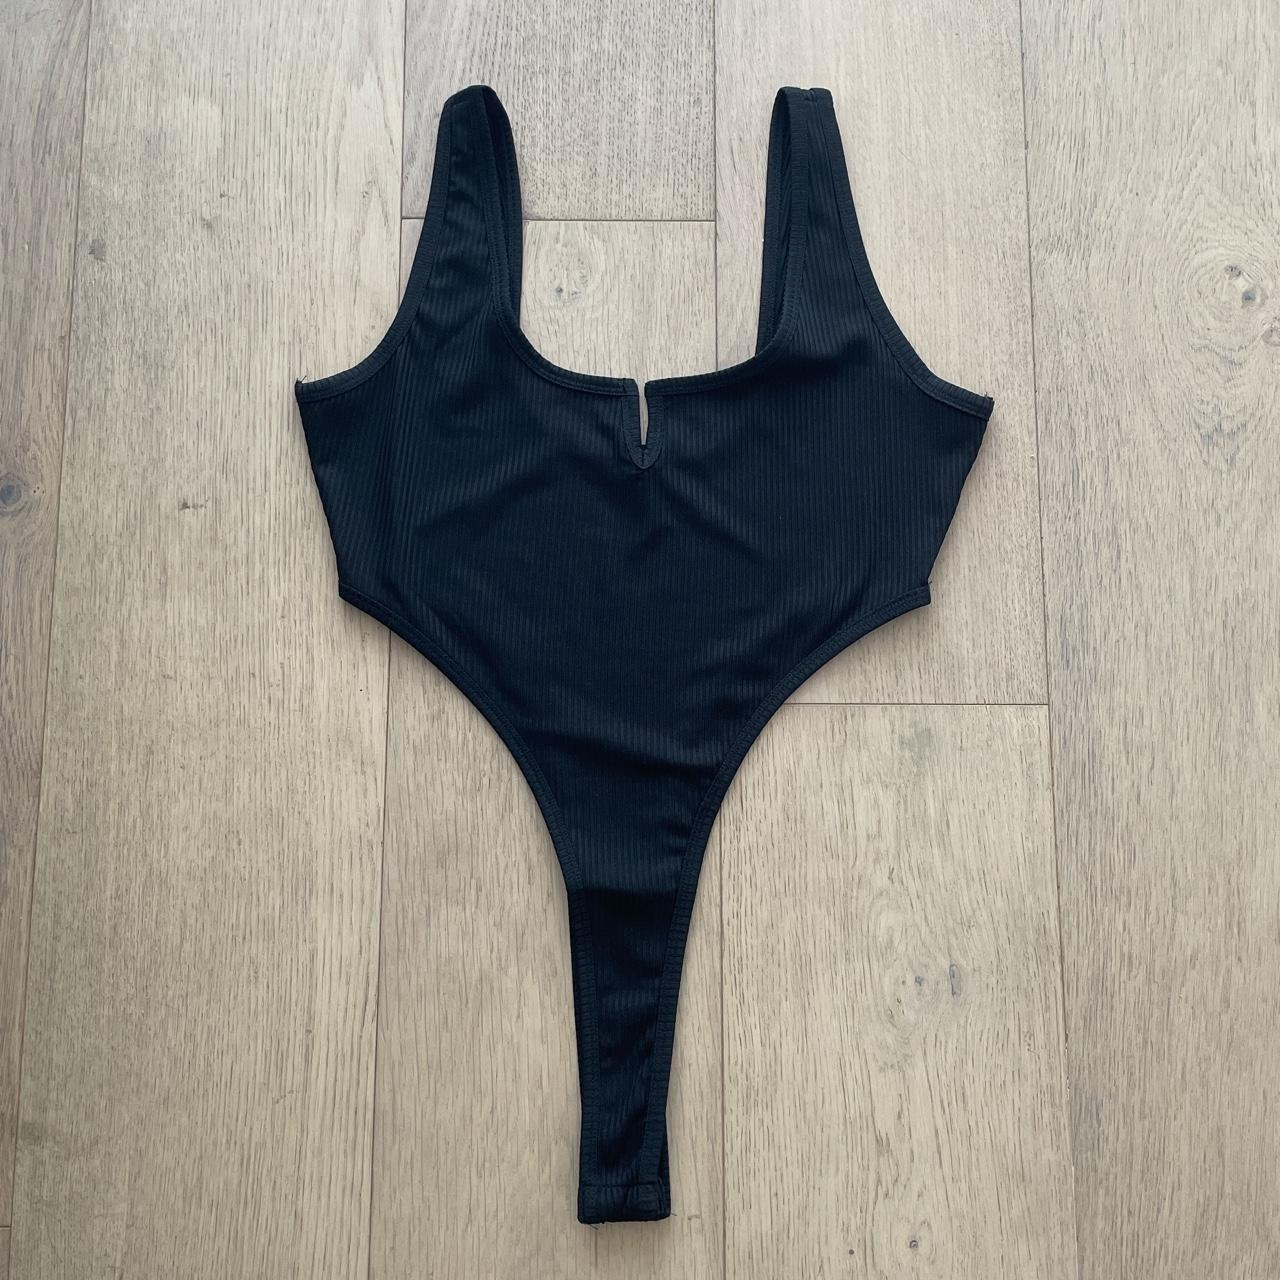 Adika bodysuit - has a notch made in the front,... - Depop